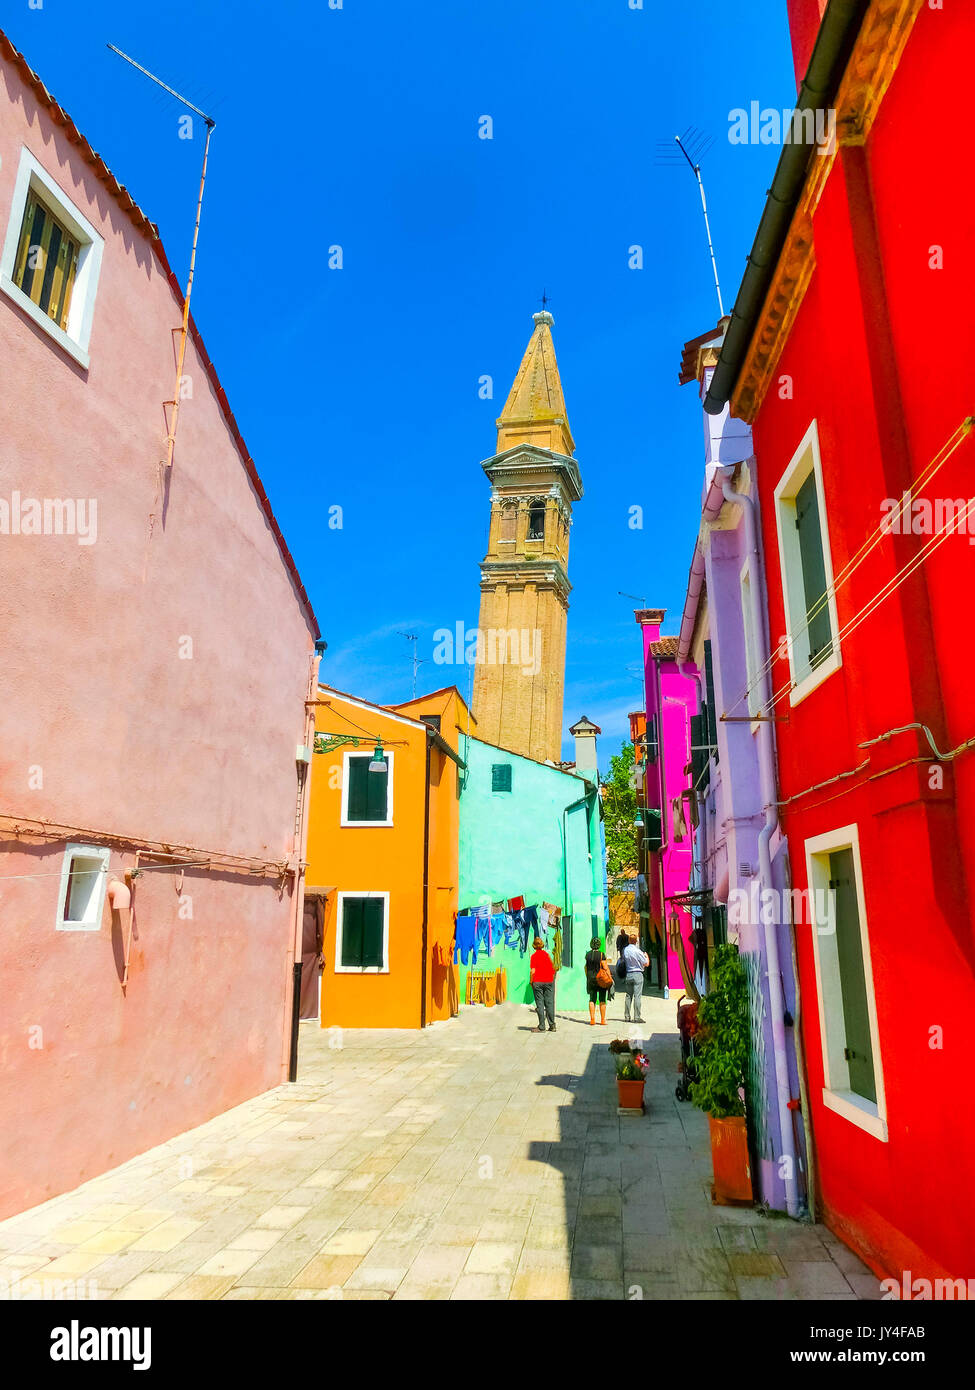 Burano, Venice, Italy - May 10, 2014: Colorful old houses on the square in the city center Stock Photo